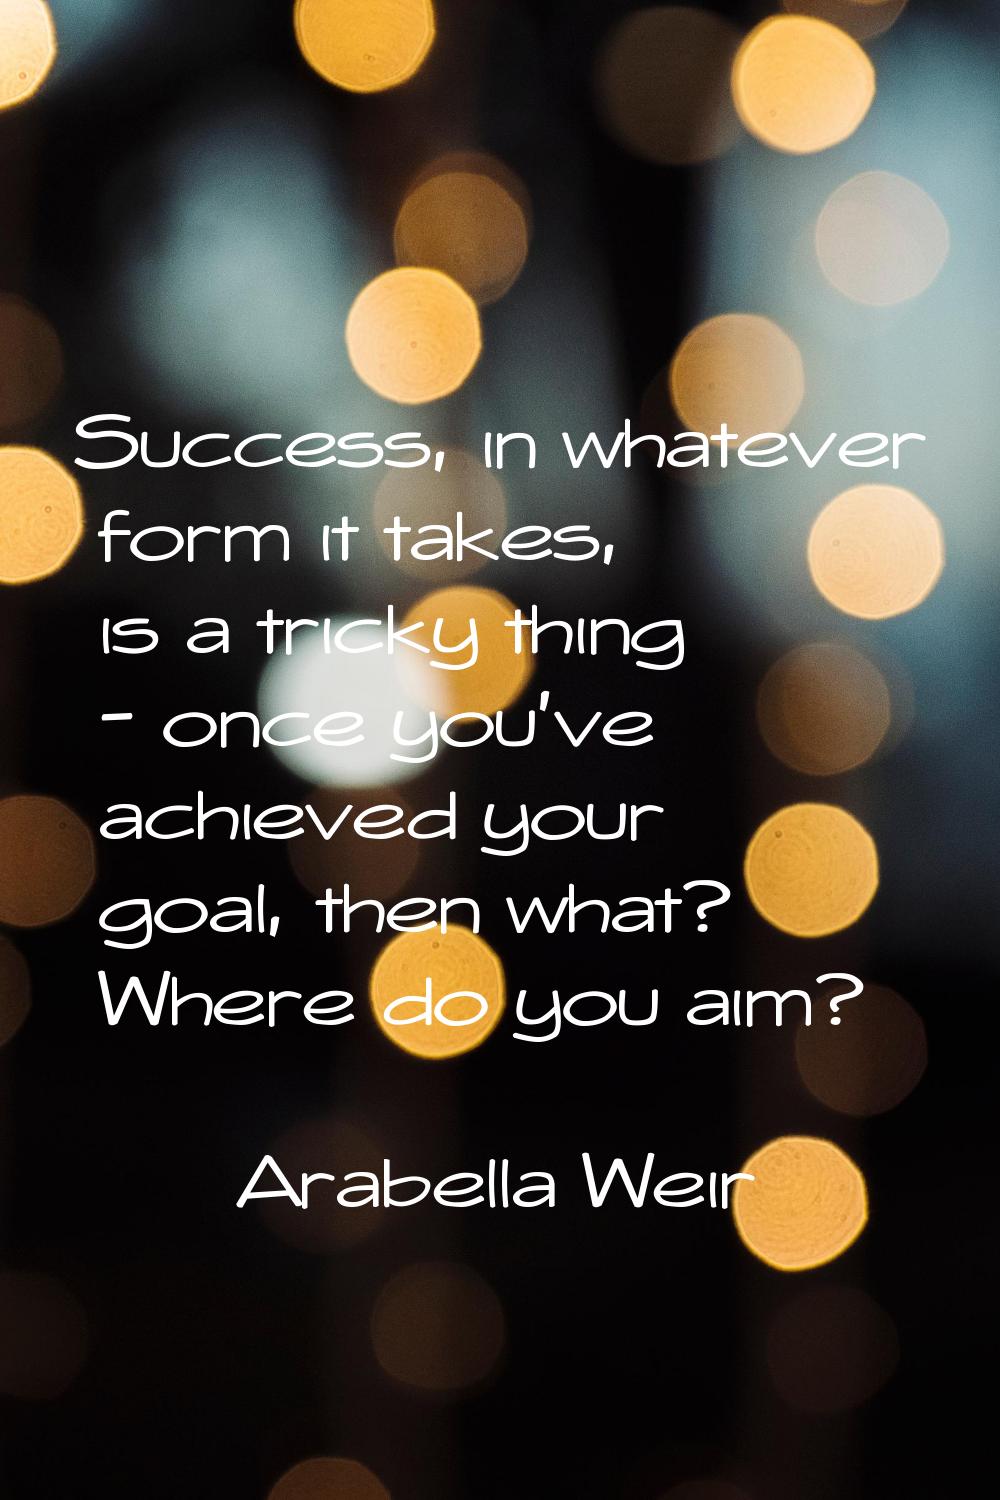 Success, in whatever form it takes, is a tricky thing - once you've achieved your goal, then what? 